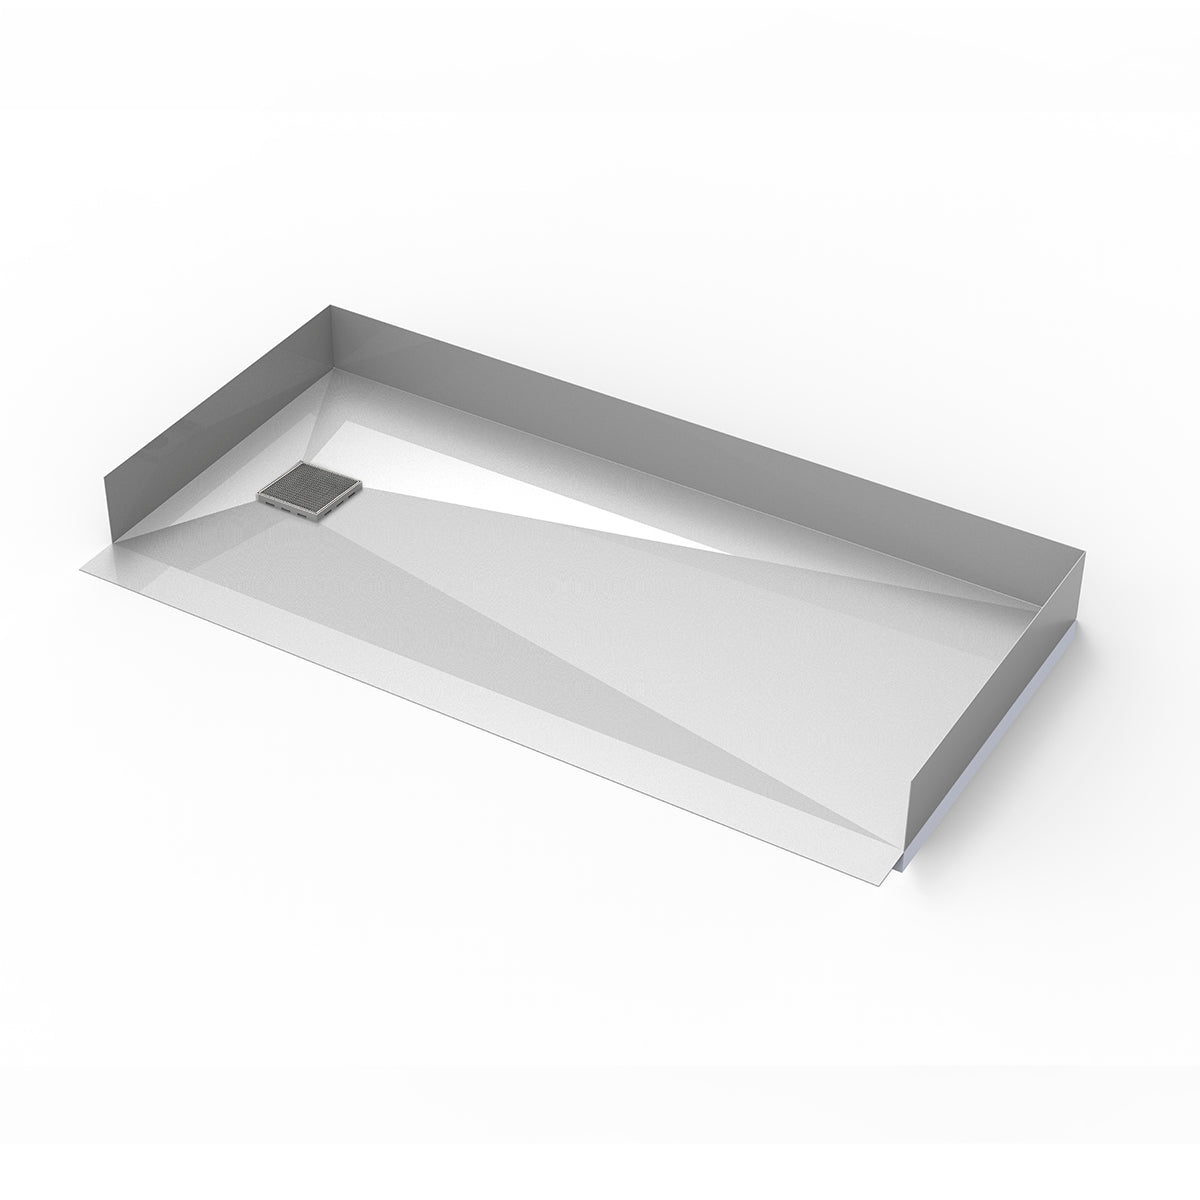 Infinity Drain 30"x 60" Curbless Stainless Steel Shower Base with Wedge Wire Left Drain location